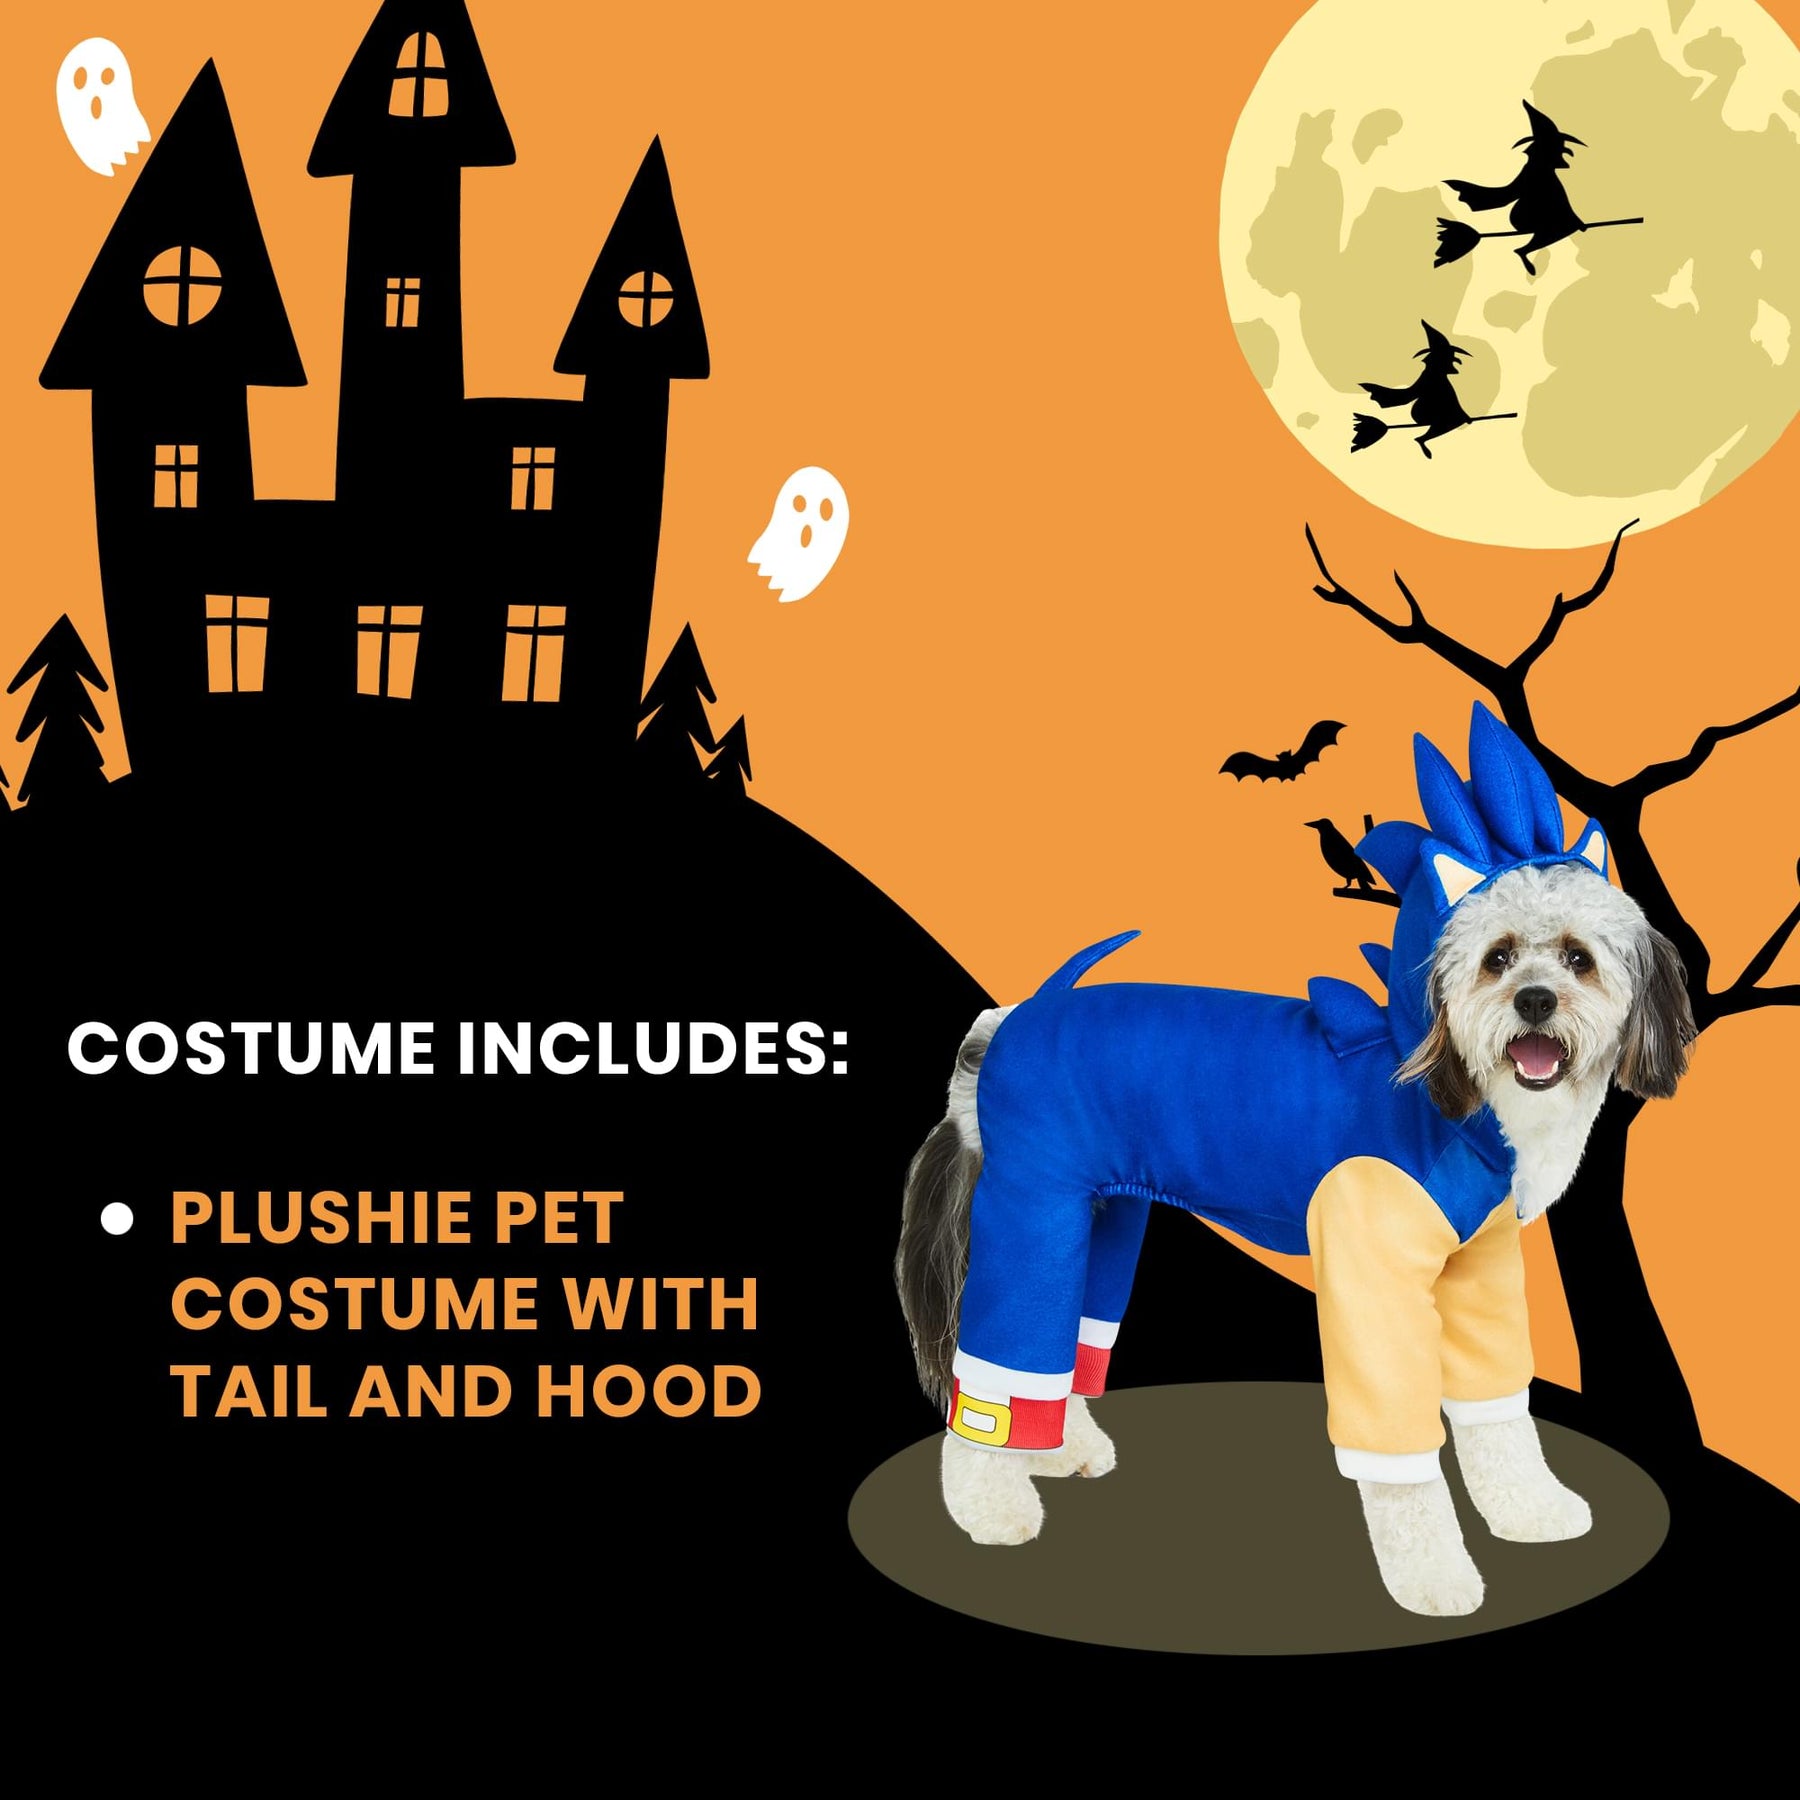 Sonic The Hedghog Pet Costume